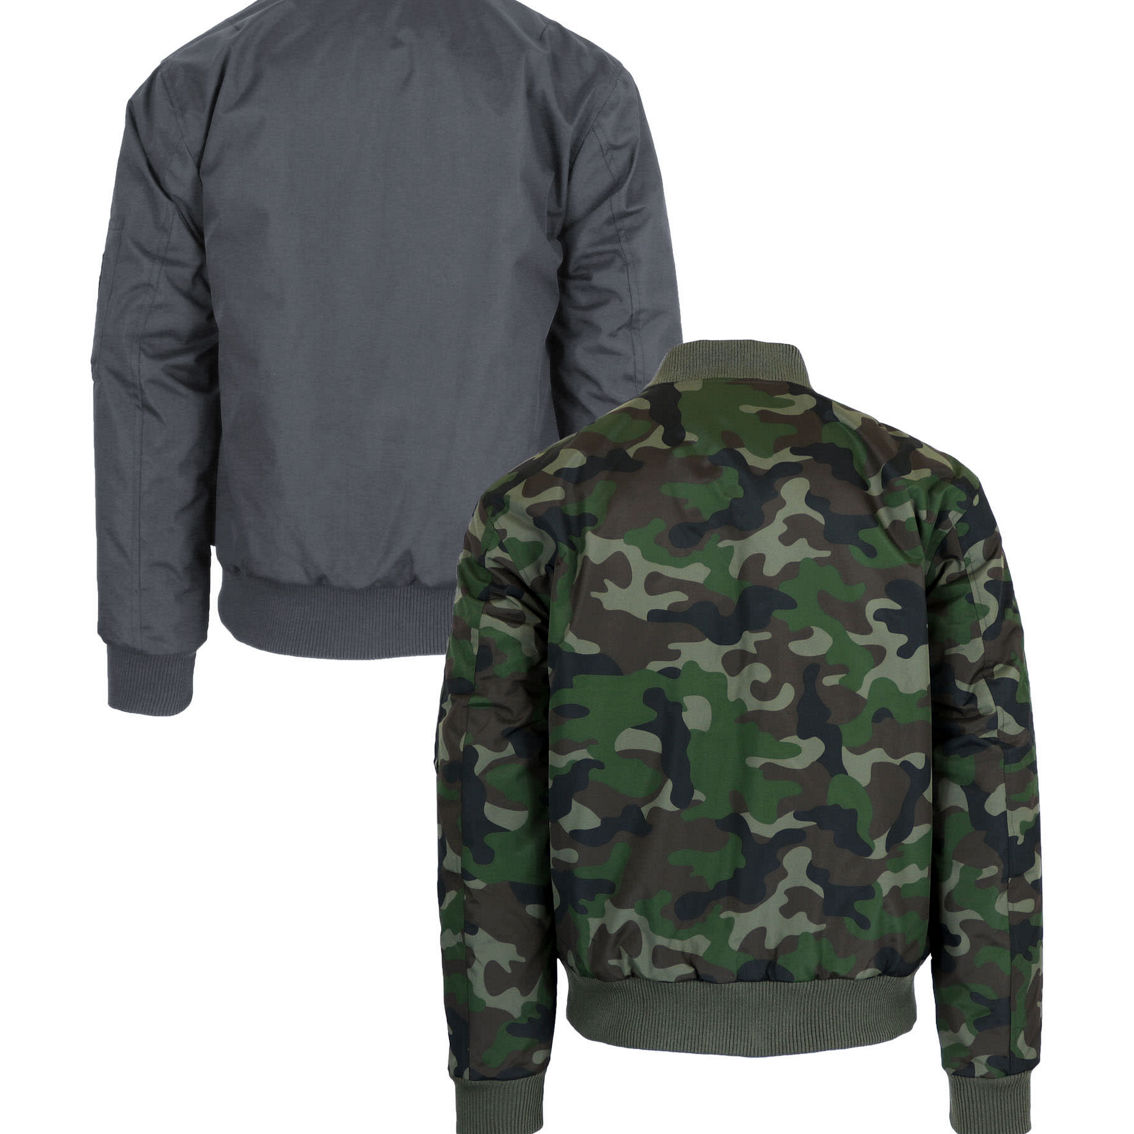 Spire By Galaxy Men's Heavyweight MA-1 Bomber Flight Jacket - 2 Pack - Image 2 of 3